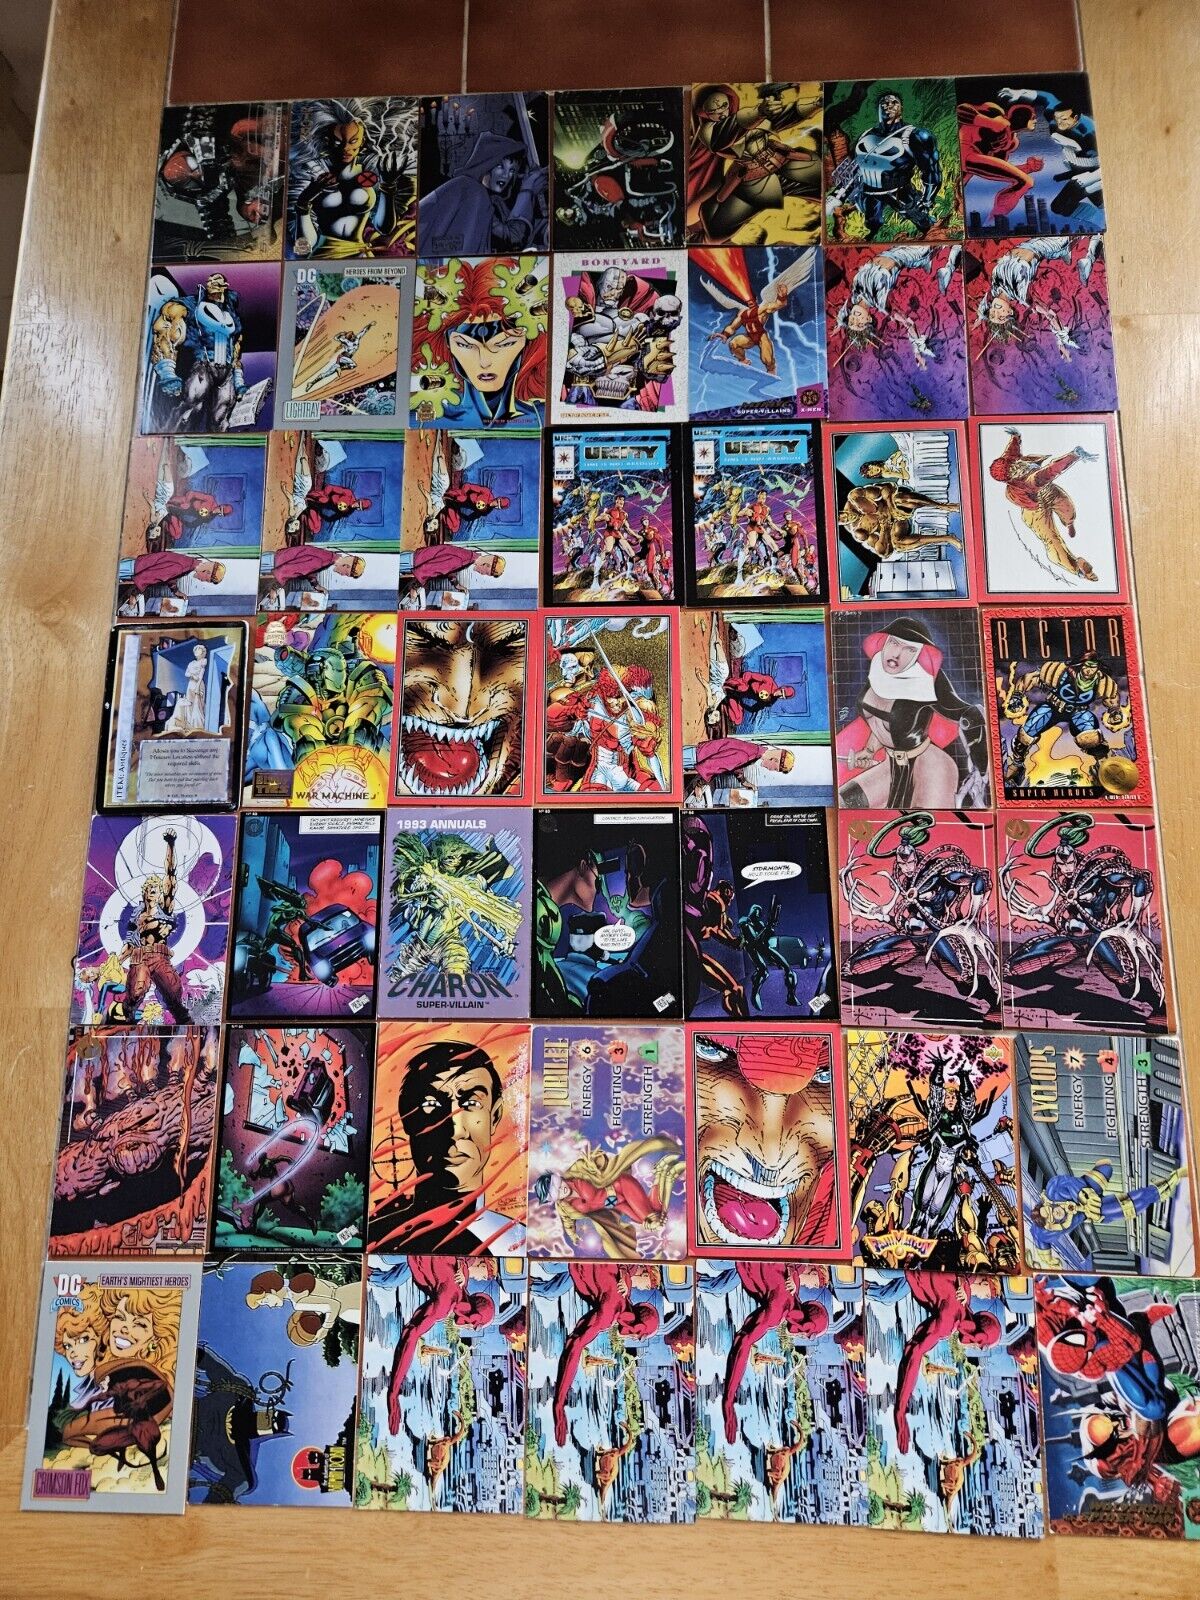 LOOSE TRADING CARD LOT - PUNISHER - 49 DIFFERENT CARDS - 1990s - MARVEL COMICS